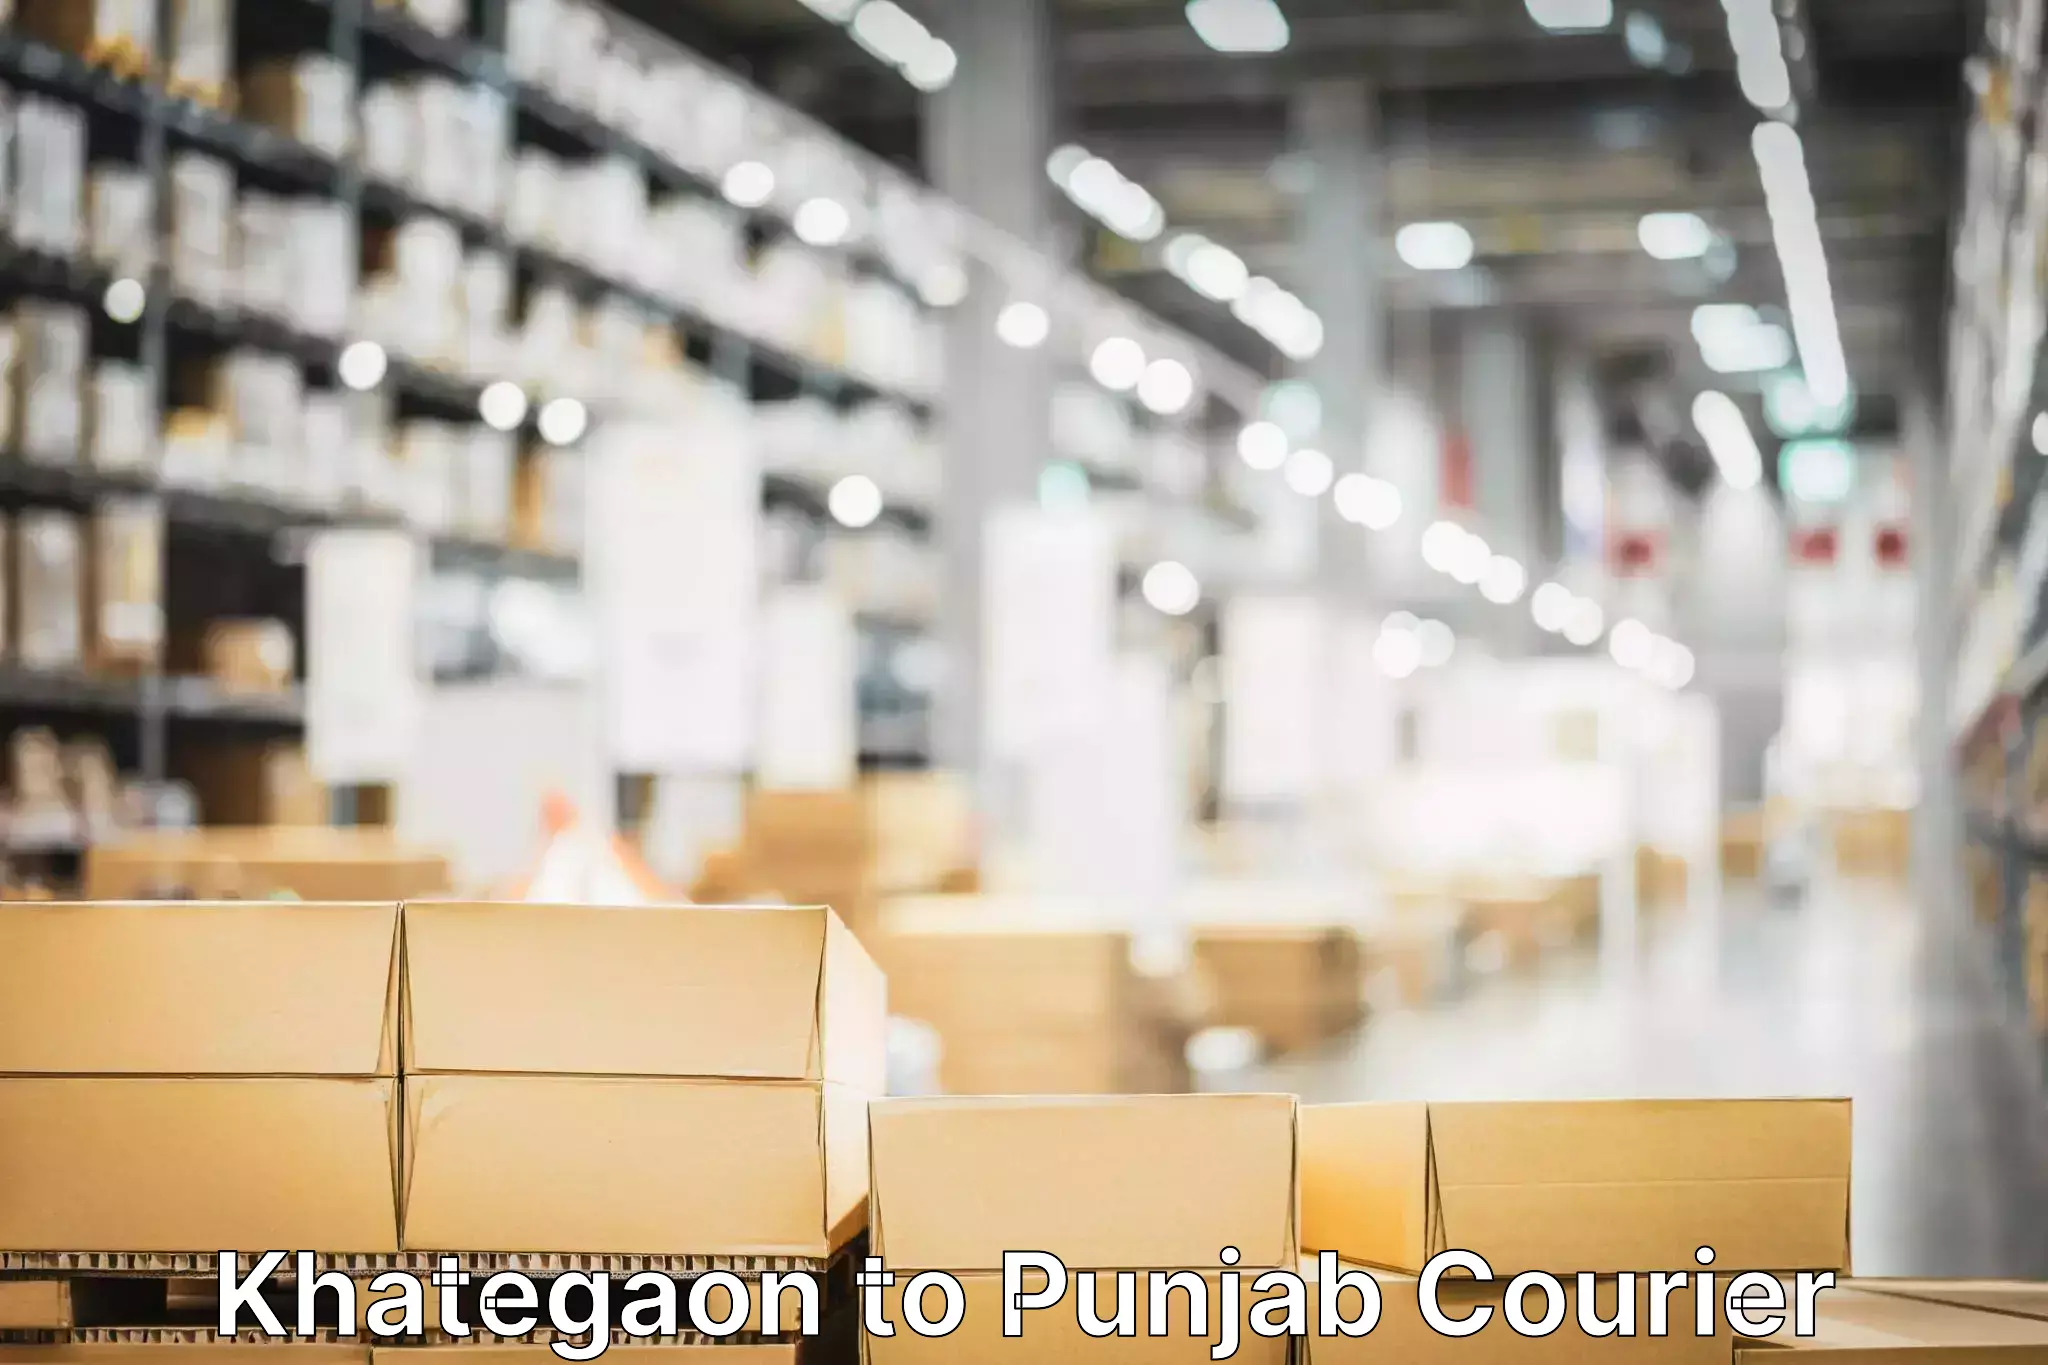 Next-day delivery options Khategaon to Punjab